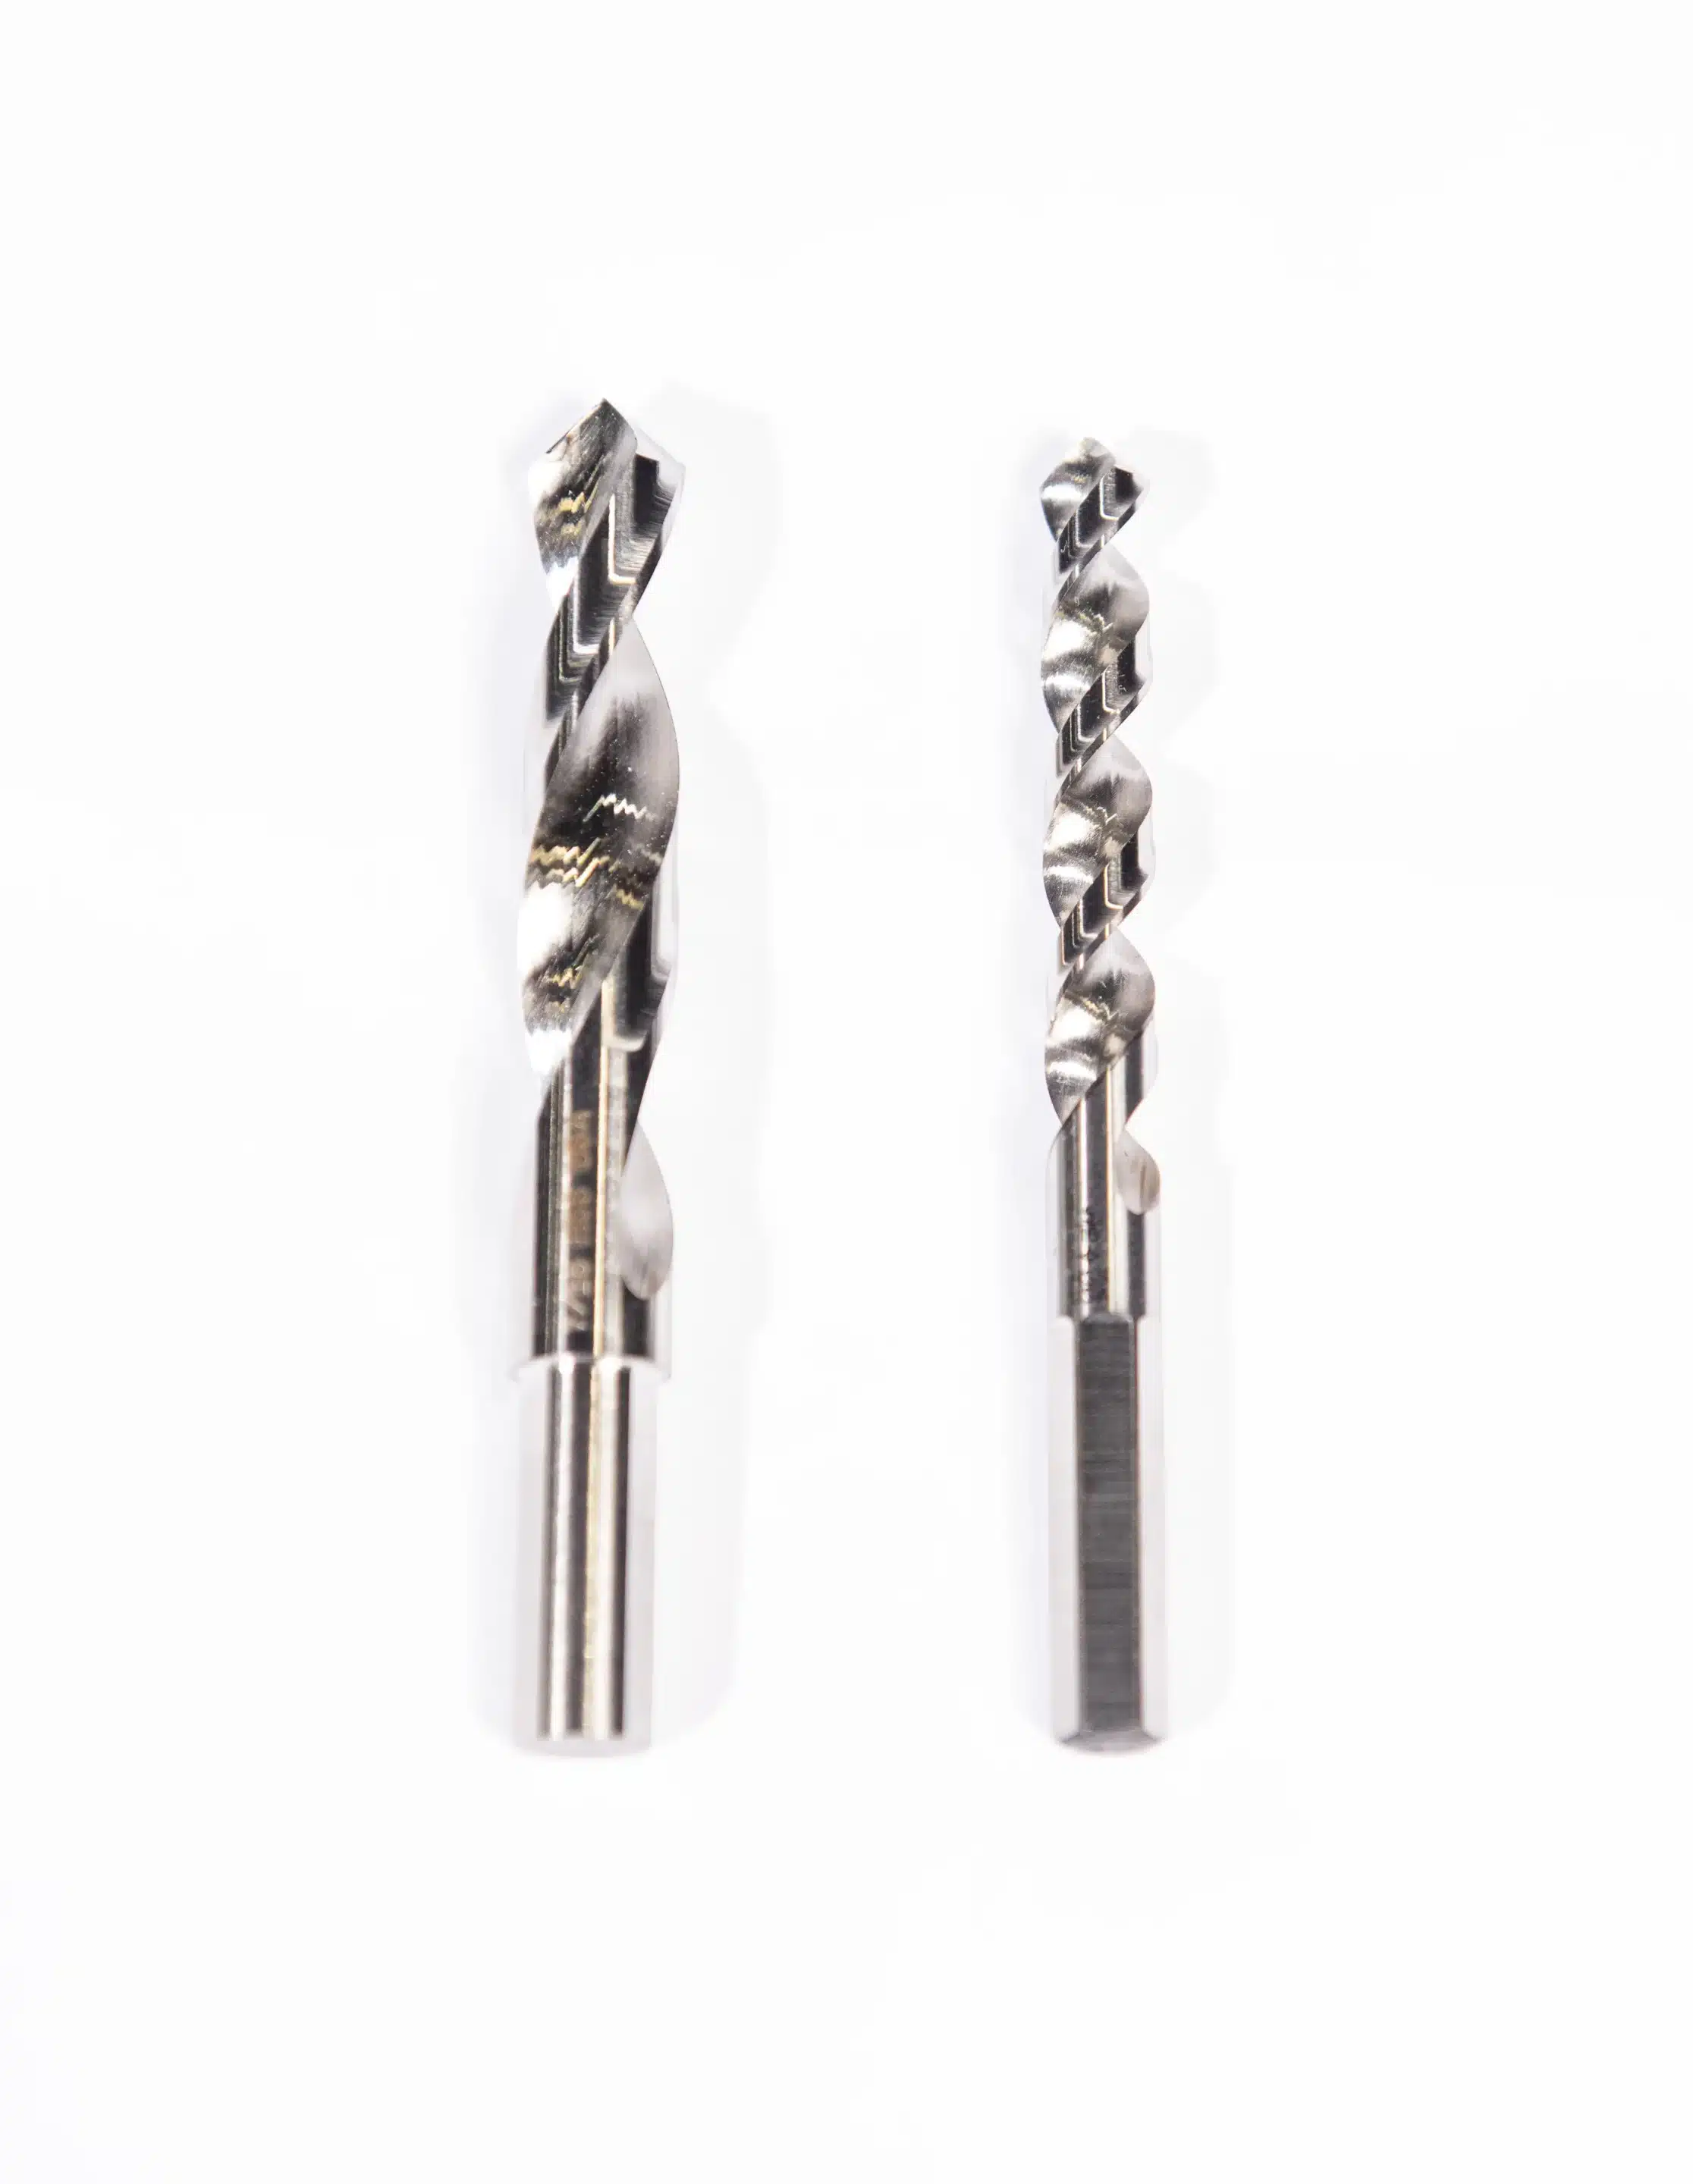 7/16" and 5/16" Drill Bits for tapping maple trees